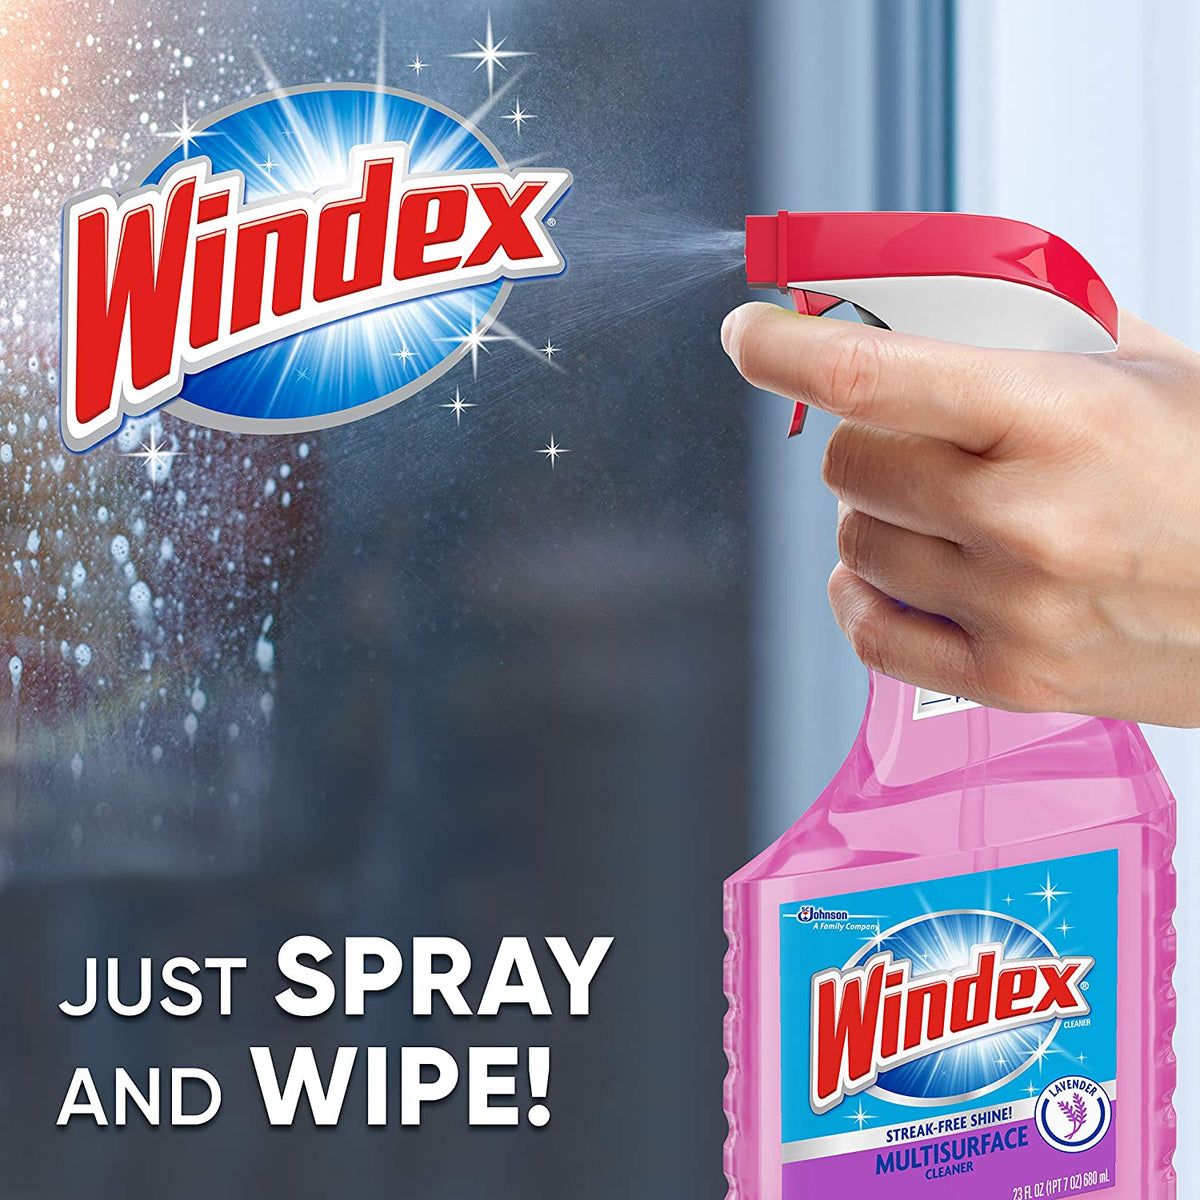 Windex 70342 Non-Toxic Multi-Surface Cleaner, Lavender Scent, 23 Oz